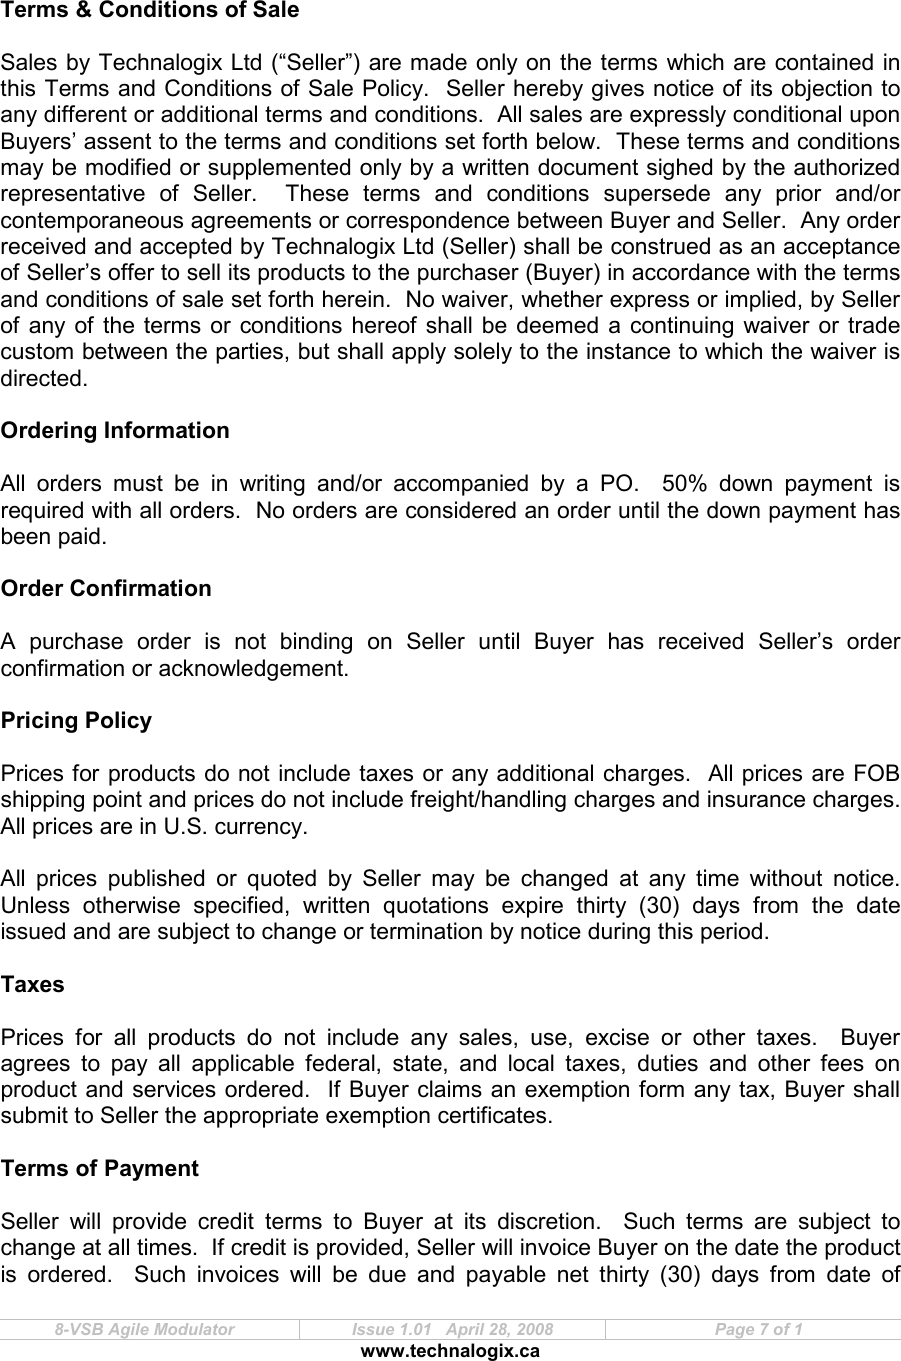  8-VSB Agile Modulator  Issue 1.01   April 28, 2008  Page 7 of 1 www.technalogix.ca     Terms &amp; Conditions of Sale  Sales by Technalogix Ltd (“Seller”) are made only on the terms which are contained in this Terms and Conditions of Sale Policy.  Seller hereby gives notice of its objection to any different or additional terms and conditions.  All sales are expressly conditional upon Buyers’ assent to the terms and conditions set forth below.  These terms and conditions may be modified or supplemented only by a written document sighed by the authorized representative  of  Seller.    These  terms  and  conditions  supersede  any  prior  and/or contemporaneous agreements or correspondence between Buyer and Seller.  Any order received and accepted by Technalogix Ltd (Seller) shall be construed as an acceptance of Seller’s offer to sell its products to the purchaser (Buyer) in accordance with the terms and conditions of sale set forth herein.  No waiver, whether express or implied, by Seller of any of the terms or conditions hereof shall be  deemed  a  continuing waiver or trade custom between the parties, but shall apply solely to the instance to which the waiver is directed.  Ordering Information  All  orders  must  be  in  writing  and/or  accompanied  by  a  PO.    50%  down  payment  is required with all orders.  No orders are considered an order until the down payment has been paid.  Order Confirmation  A  purchase  order  is  not  binding  on  Seller  until  Buyer  has  received  Seller’s  order confirmation or acknowledgement.   Pricing Policy  Prices for products do not include taxes or any additional charges.  All prices are FOB shipping point and prices do not include freight/handling charges and insurance charges.  All prices are in U.S. currency.  All  prices  published  or  quoted  by  Seller  may  be  changed  at  any  time  without  notice.  Unless  otherwise  specified,  written  quotations  expire  thirty  (30)  days  from  the  date issued and are subject to change or termination by notice during this period.  Taxes  Prices  for  all  products  do  not  include  any  sales,  use,  excise  or  other  taxes.    Buyer agrees  to  pay  all  applicable  federal,  state,  and  local  taxes,  duties  and  other  fees  on product and services ordered.  If Buyer claims an exemption form any tax, Buyer shall submit to Seller the appropriate exemption certificates.  Terms of Payment  Seller  will  provide  credit  terms  to  Buyer  at  its  discretion.    Such  terms  are  subject  to change at all times.  If credit is provided, Seller will invoice Buyer on the date the product is  ordered.    Such  invoices  will  be  due  and  payable  net  thirty  (30)  days  from  date  of 